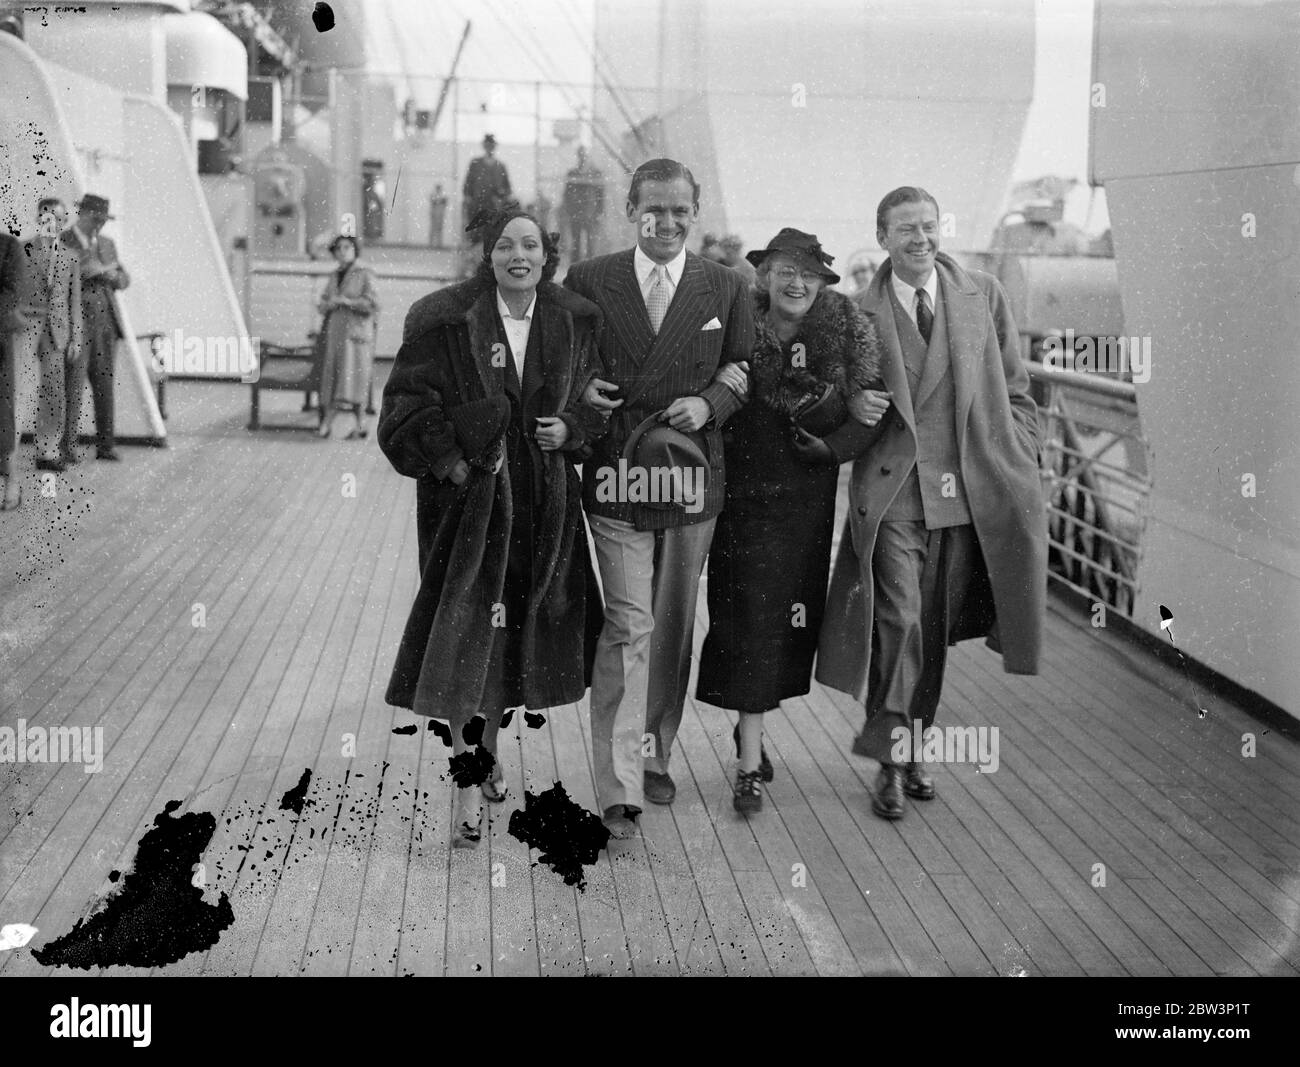 Dolores Del Rio Leaves For America After Work On British Film . Dolores del Rio , film actress , who has been working in British studios , left Southampton for America aboard  Queen Mary  is making her second voyage to the United States . Photo Shows : Dolores del Rio with Douglas Fairbanks Jr . and Anna Beth Sully and Jack Whiting ( Douglas ' s mother and step - father ) aboard  Queen Mary  at Southampton . 17 Jun 1936 Stock Photo